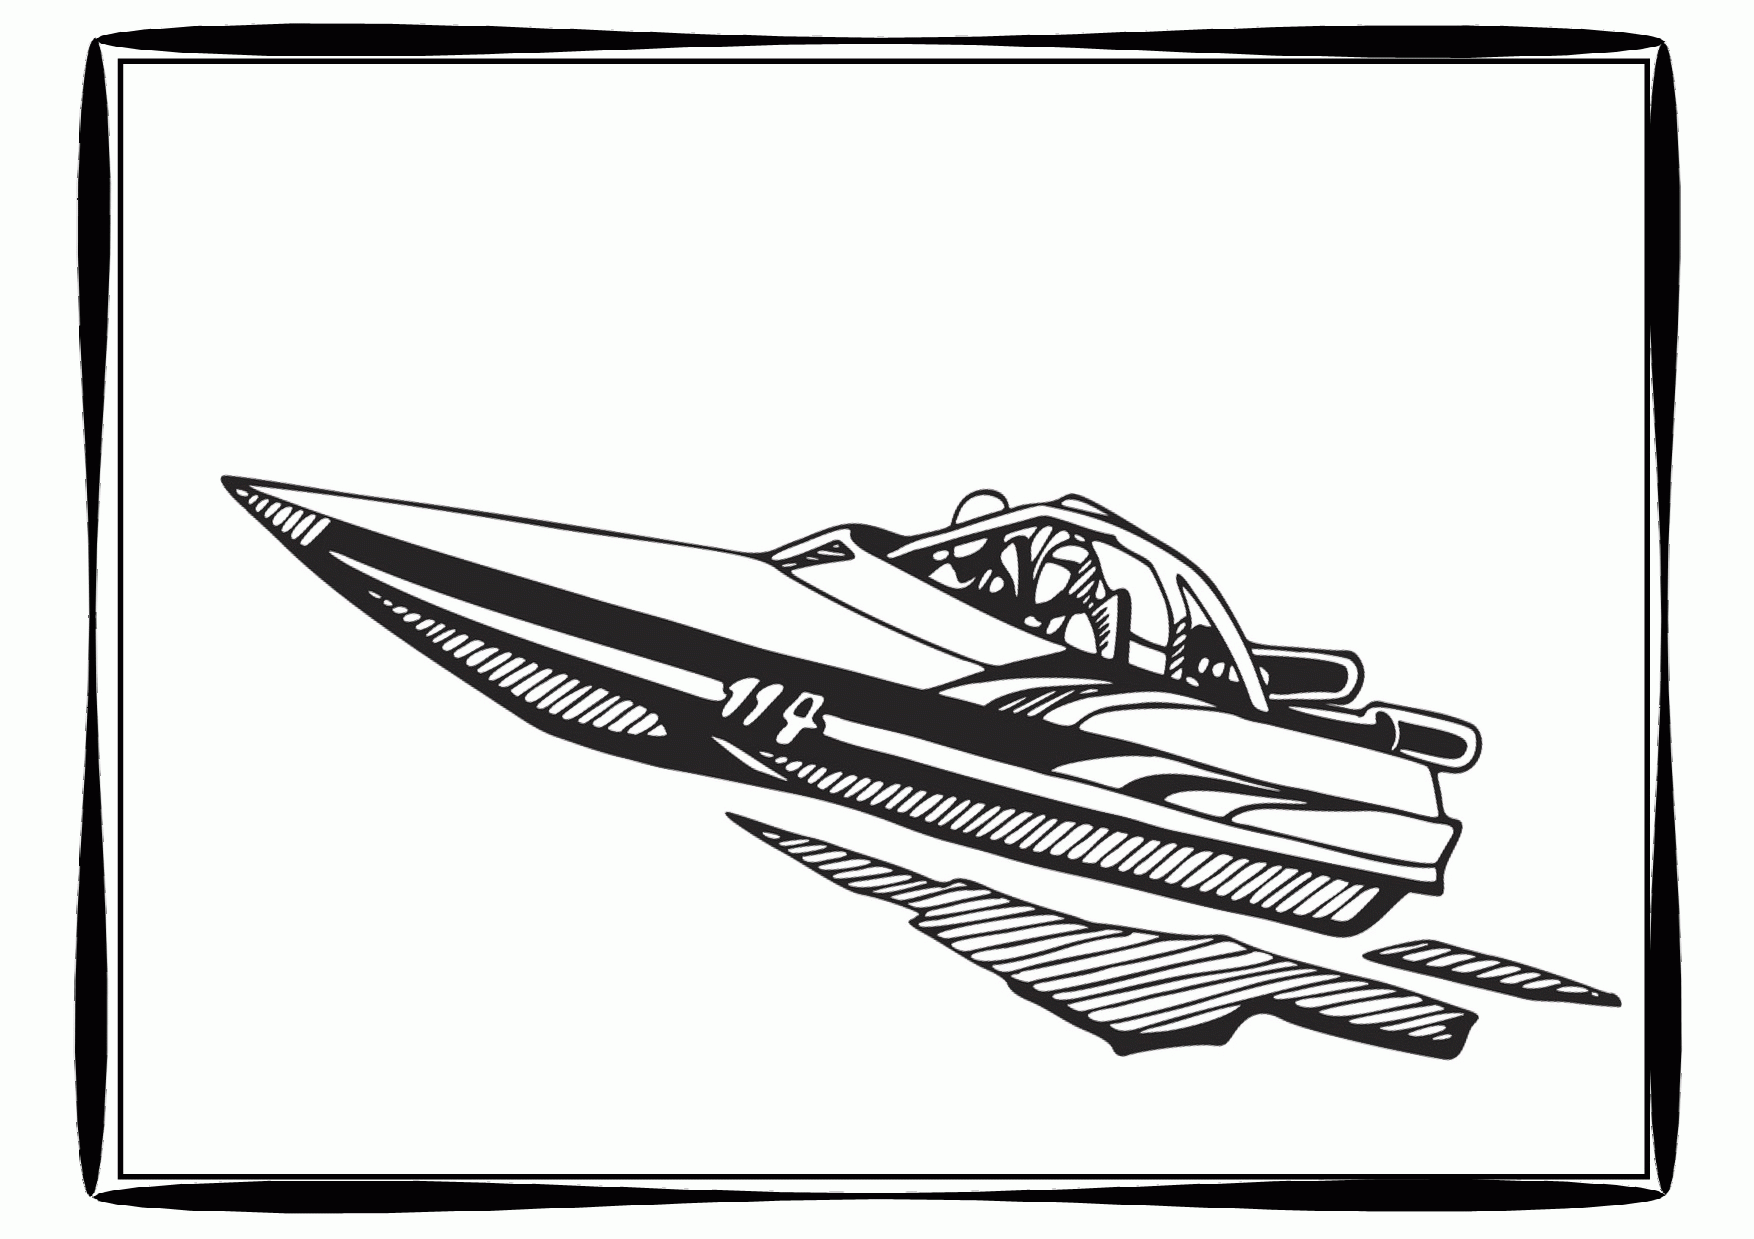 Speedboat coloring page  Free Printable Coloring Pages